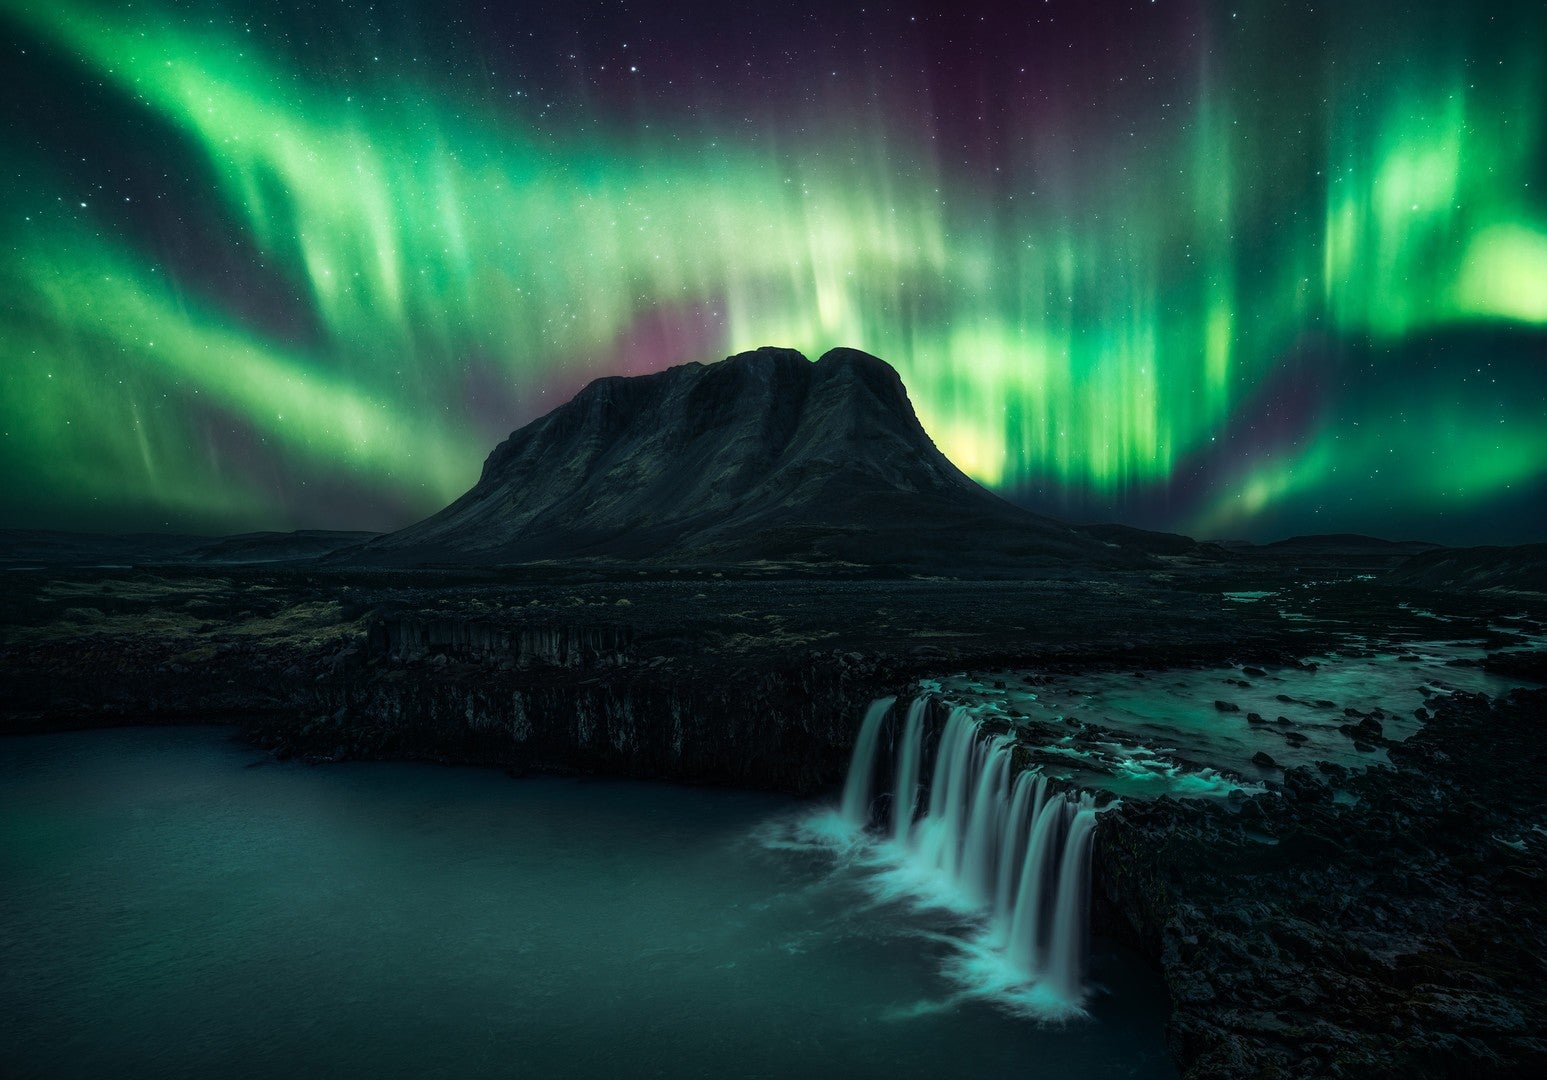 The lights and a waterfall in Iceland. (Photo: Jannes Krause)